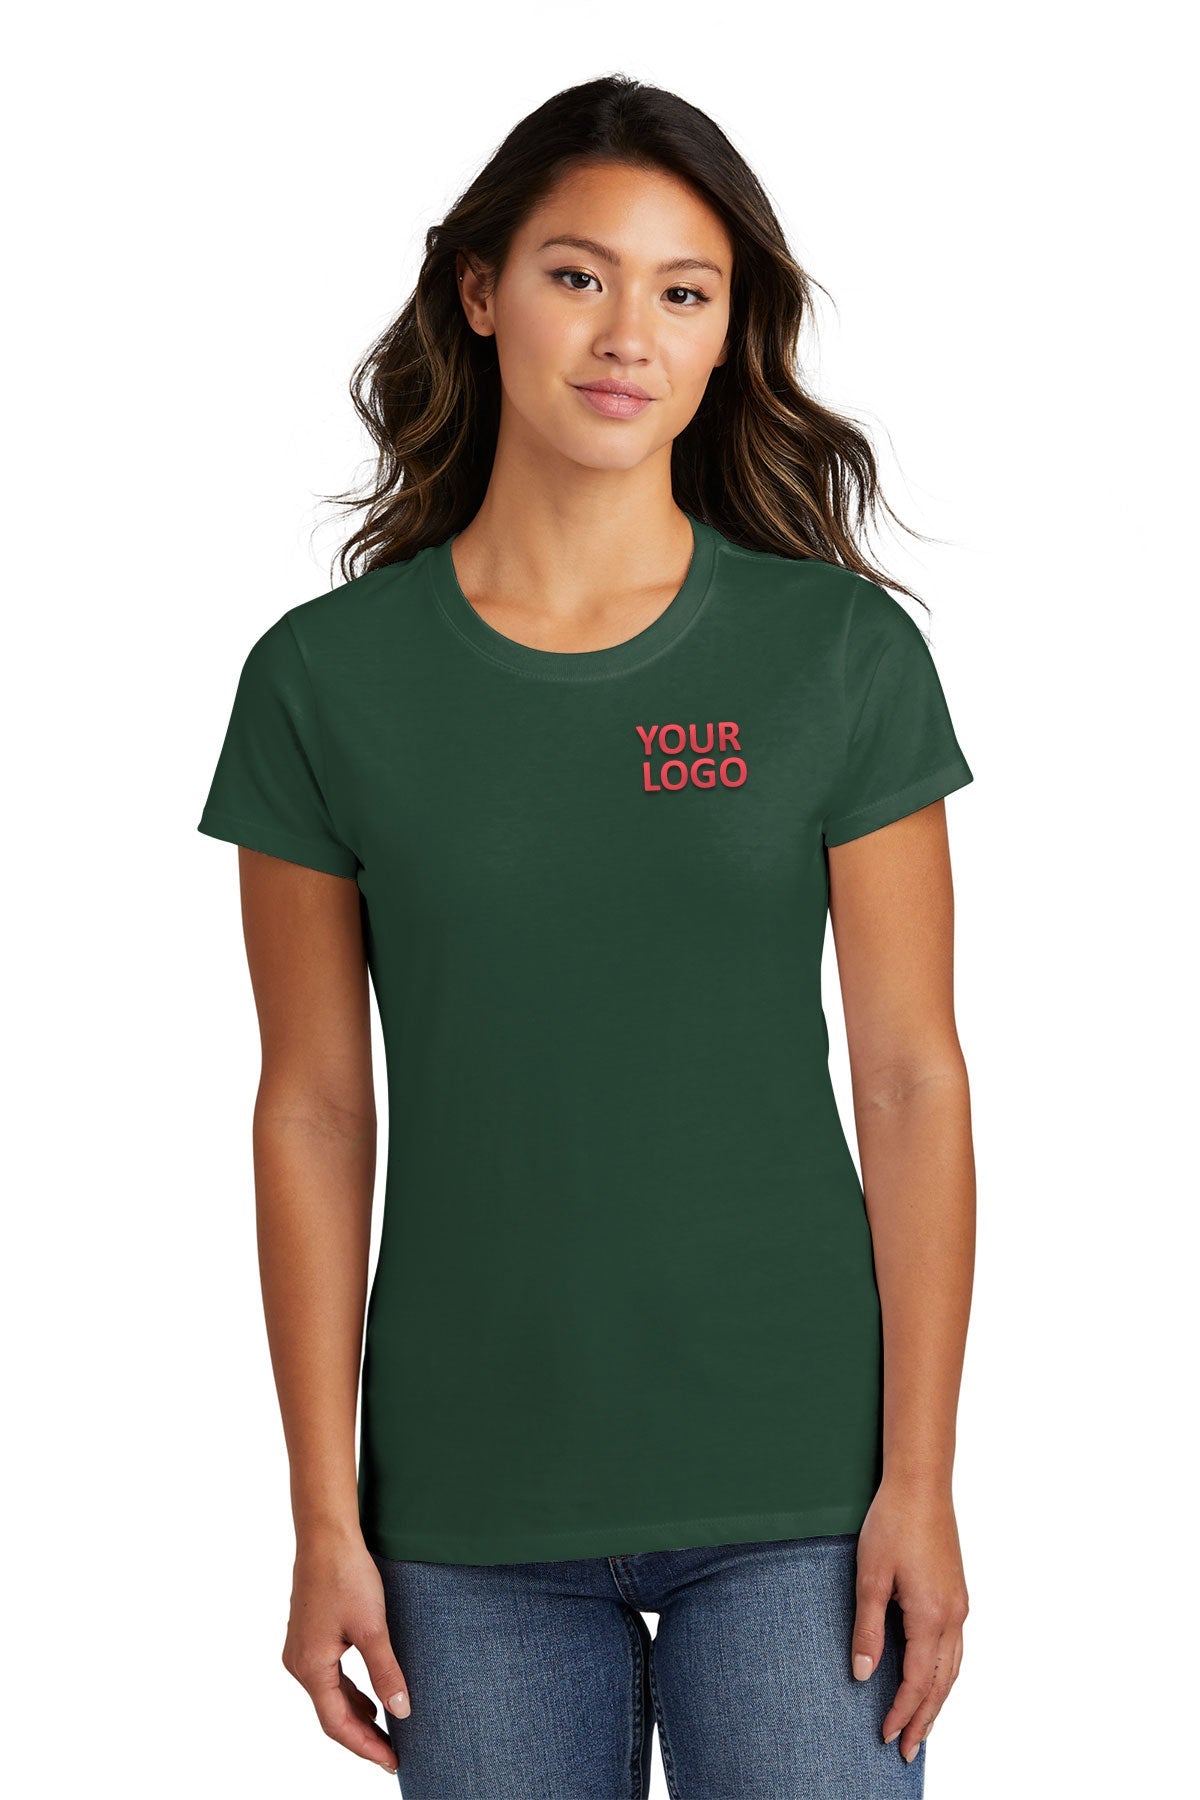 Port & Company Ladies Fan Customized Favorite Tee's, Forest Green